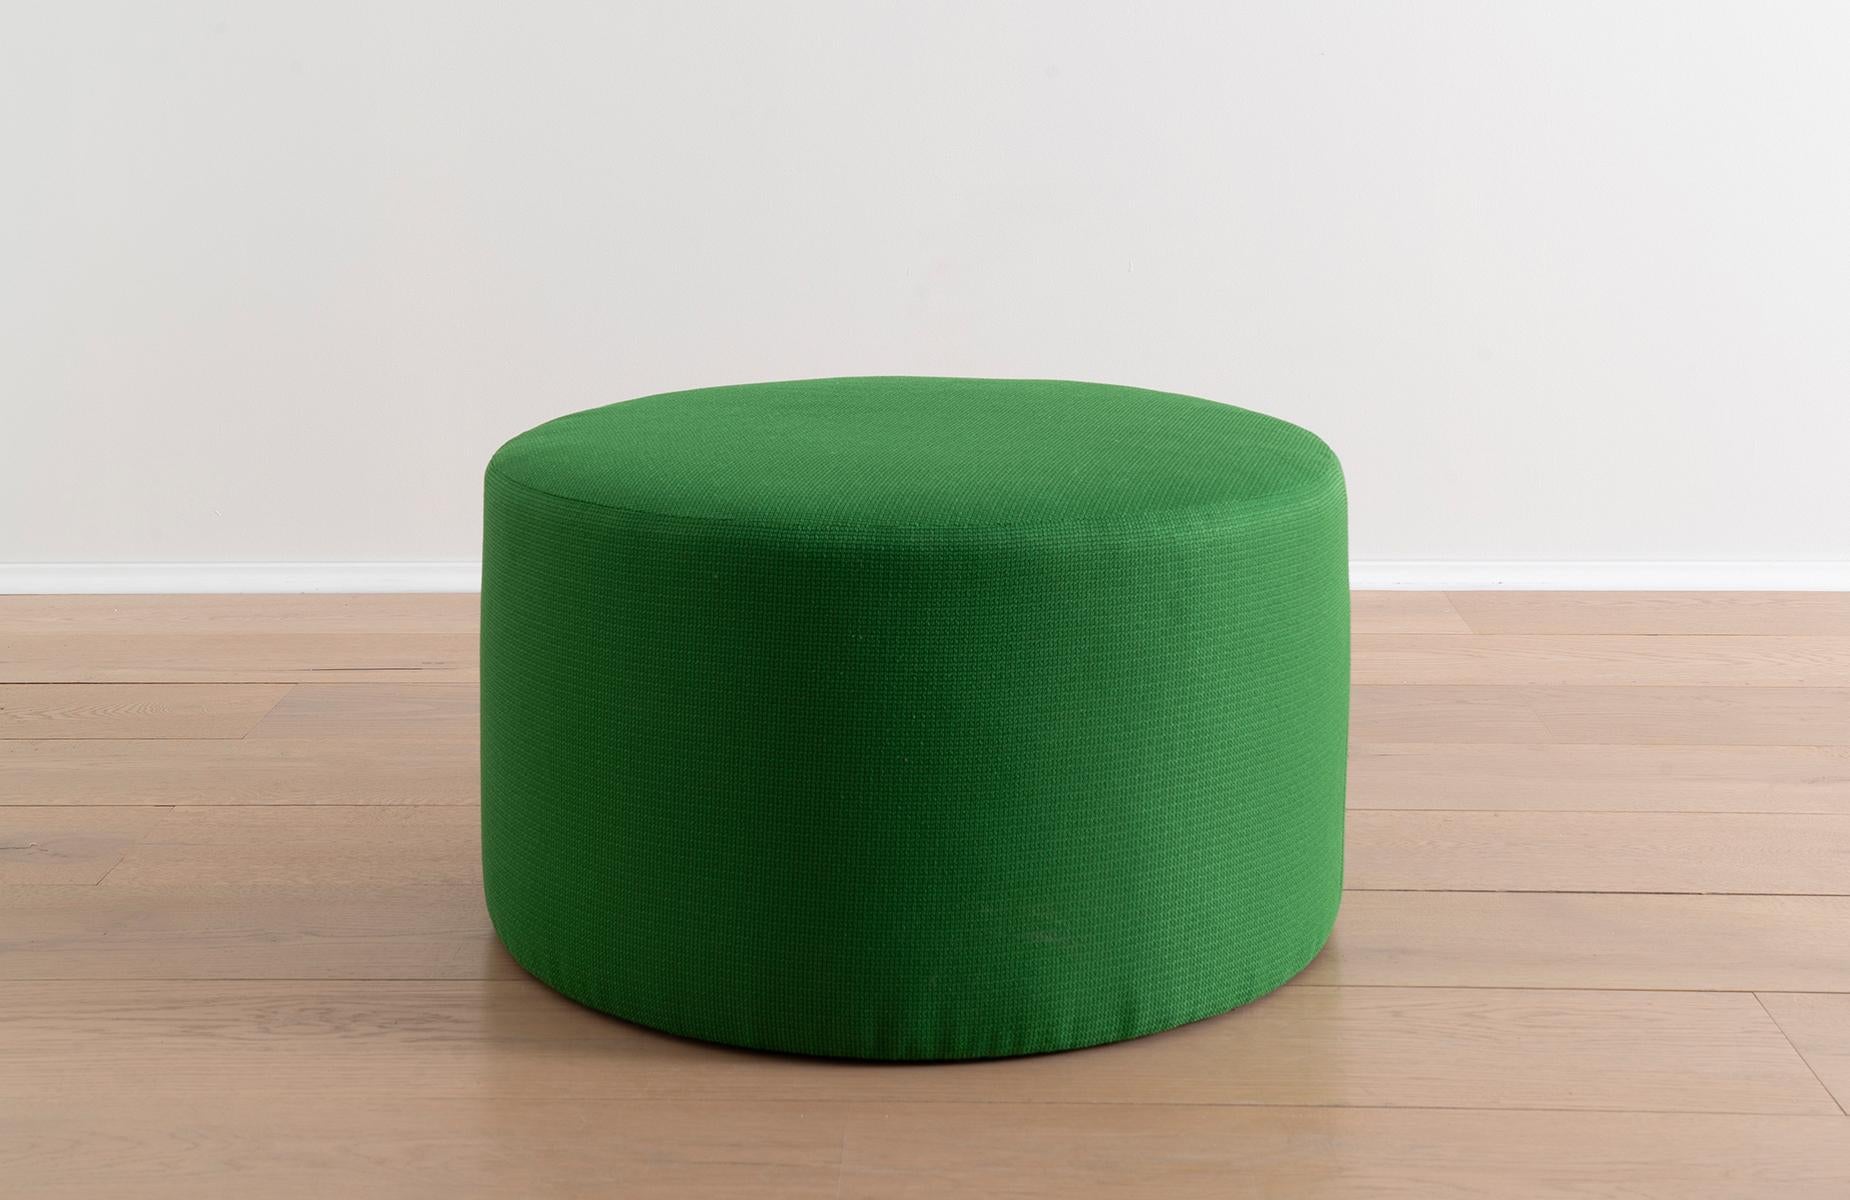 This green ottoman pairs well with just about any sofa or lounge chair, while also offering versatility as a pouf, coffee or side table. Invite both color and a functional upgrade into any seating arrangement with this sculptural study in